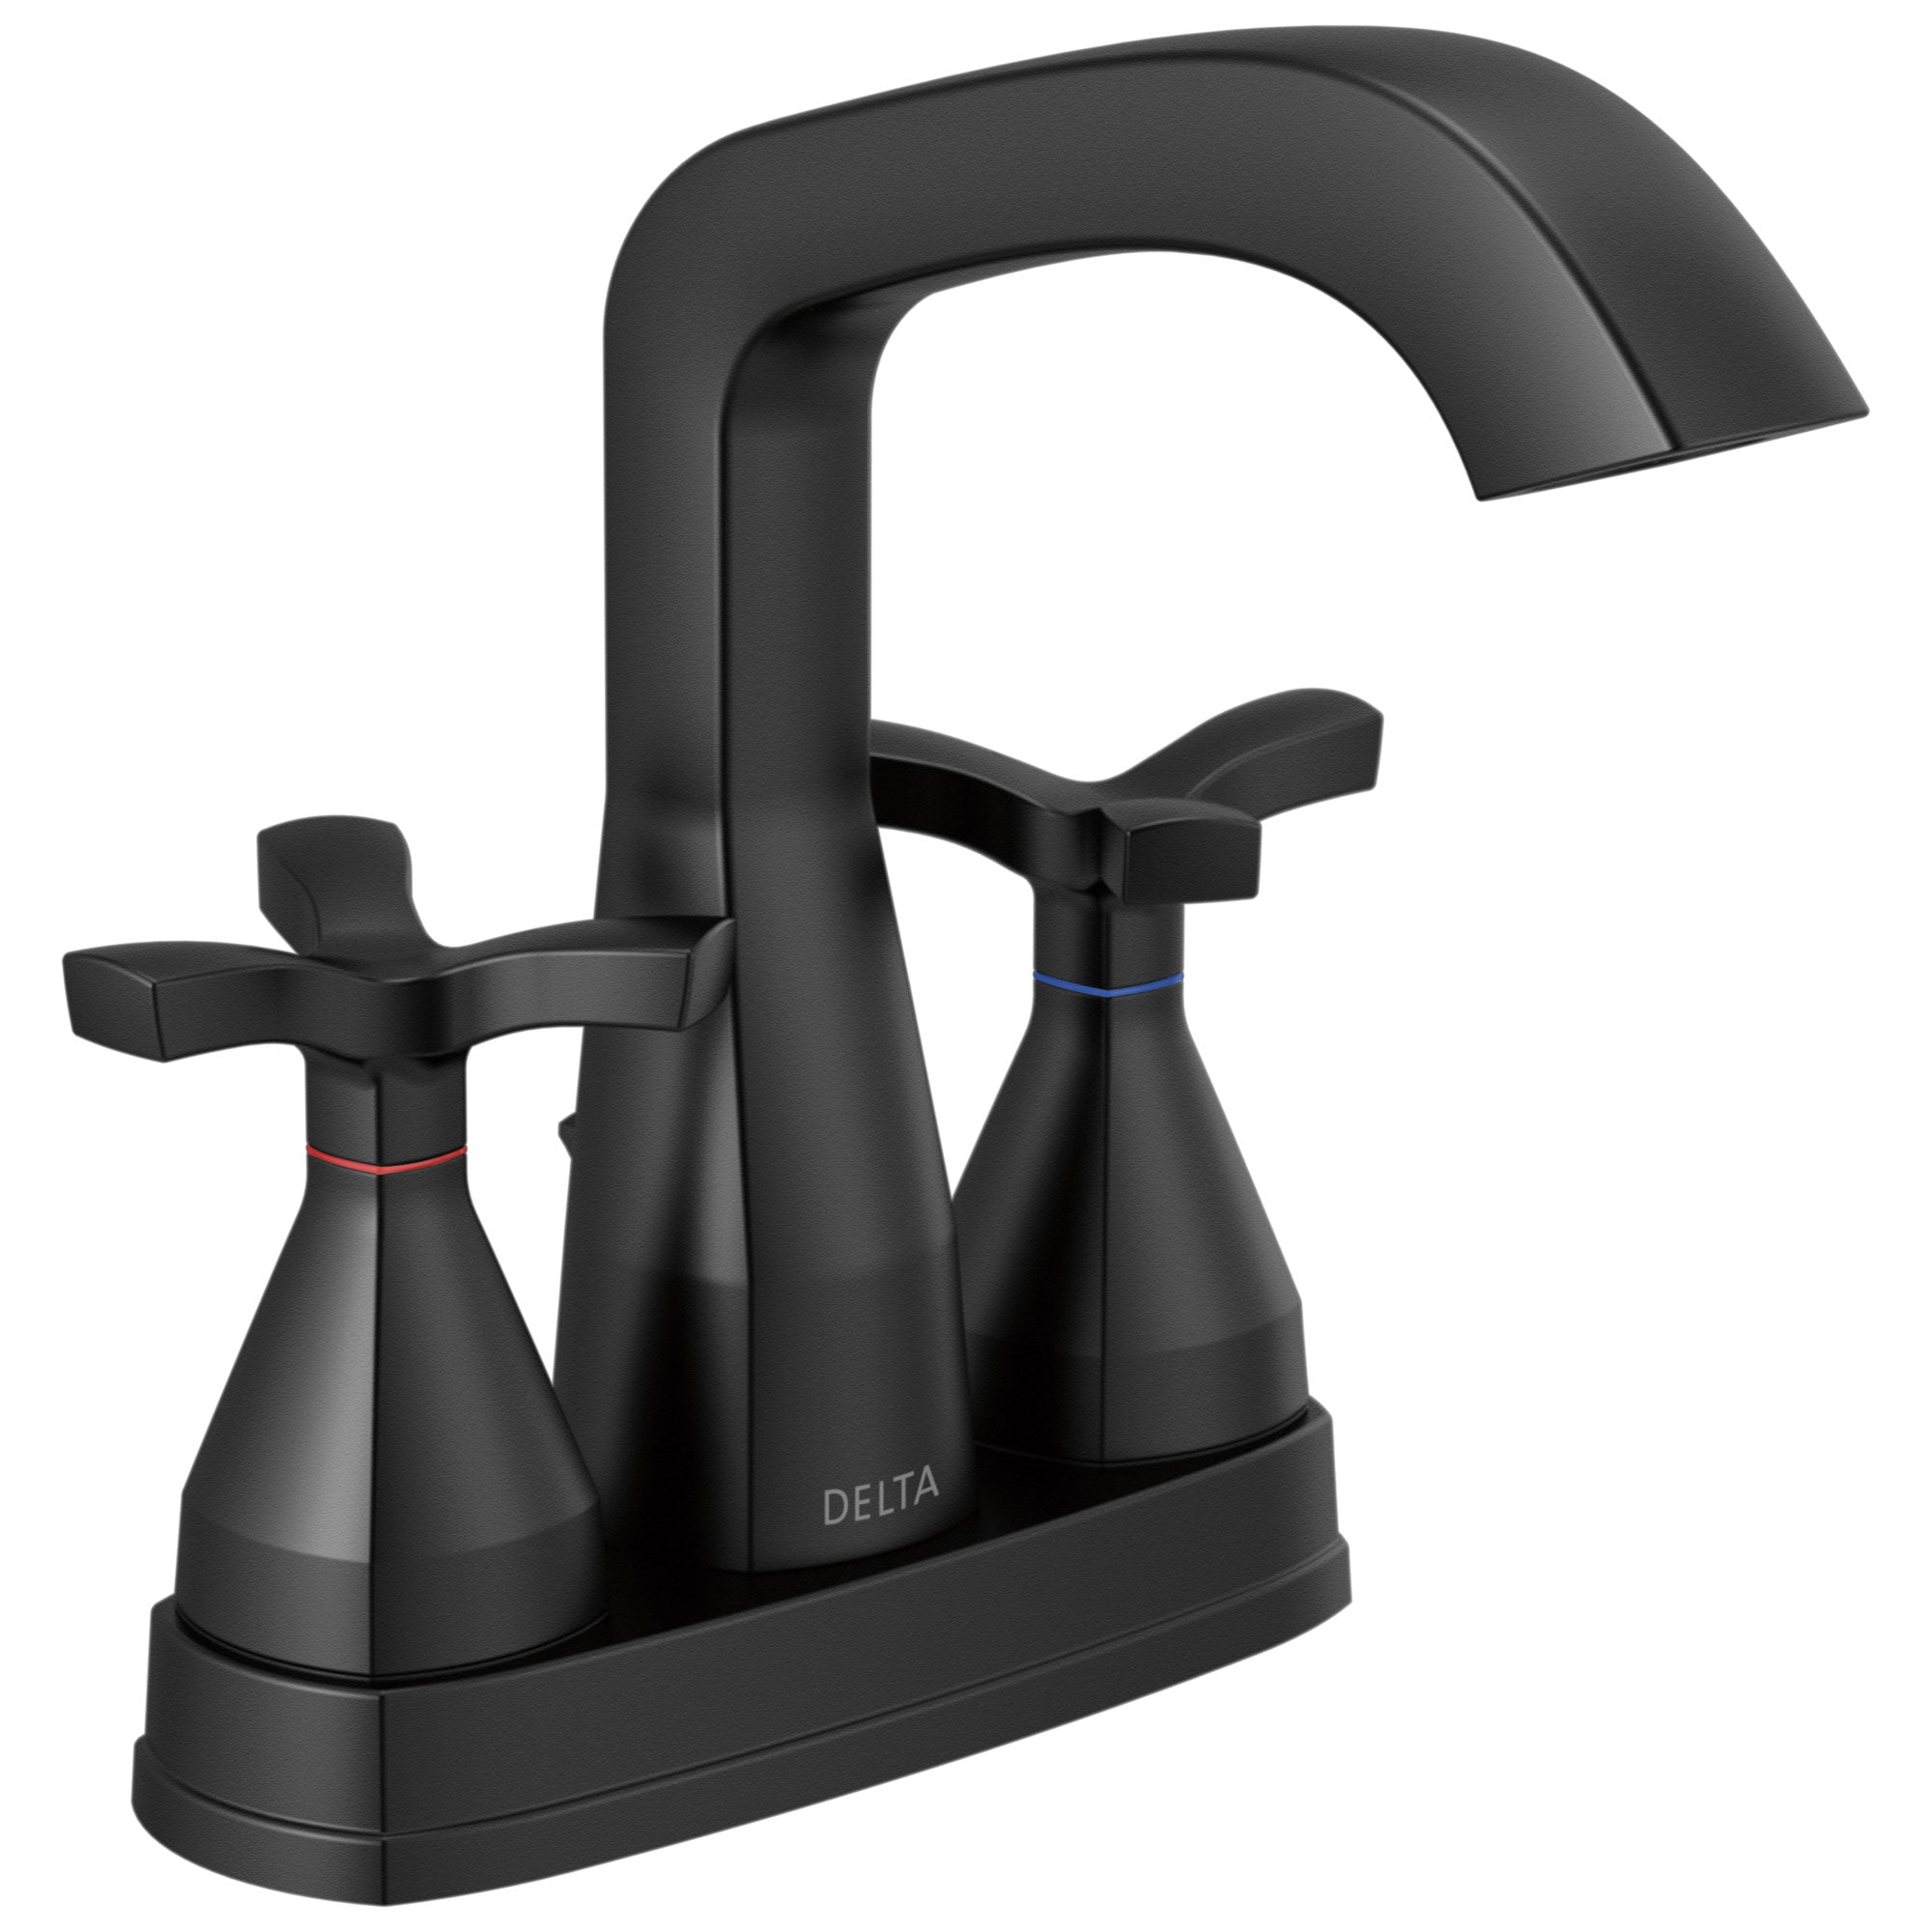 Delta Stryke Matte Black Finish Centerset Bathroom Faucet with Matching Drain and Cross Handles D257766BLMPUDST